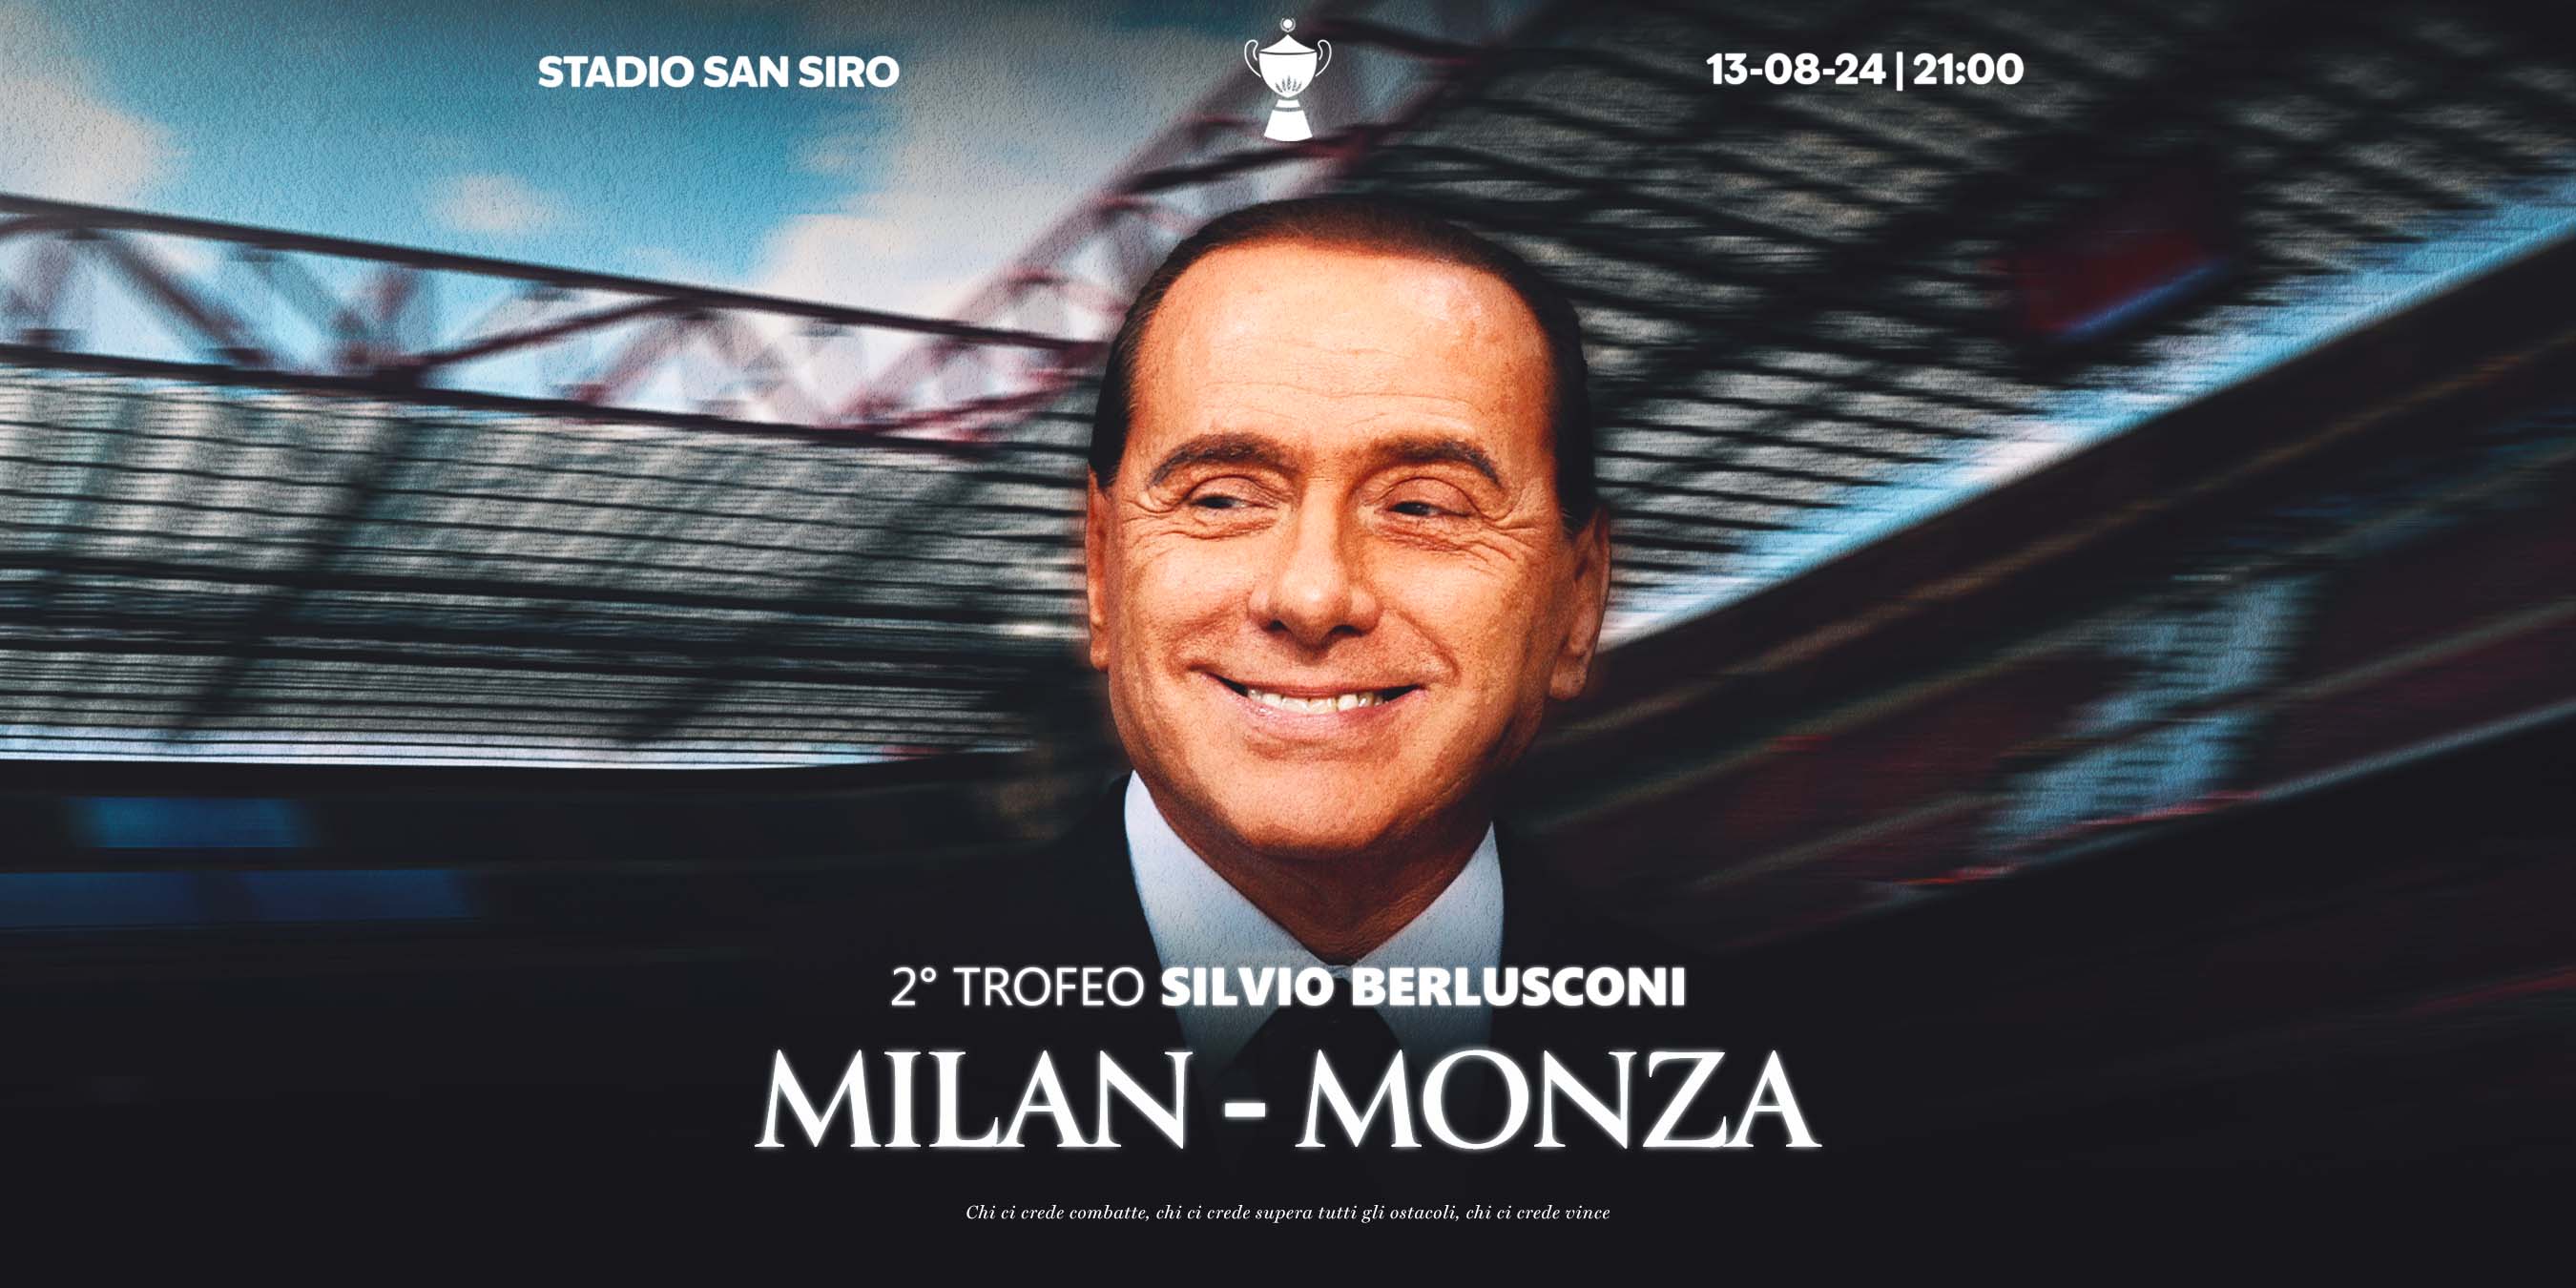 THE SILVIO BERLUSCONI TROPHY RETURNS, FEATURING AC MILAN AND AC MONZA